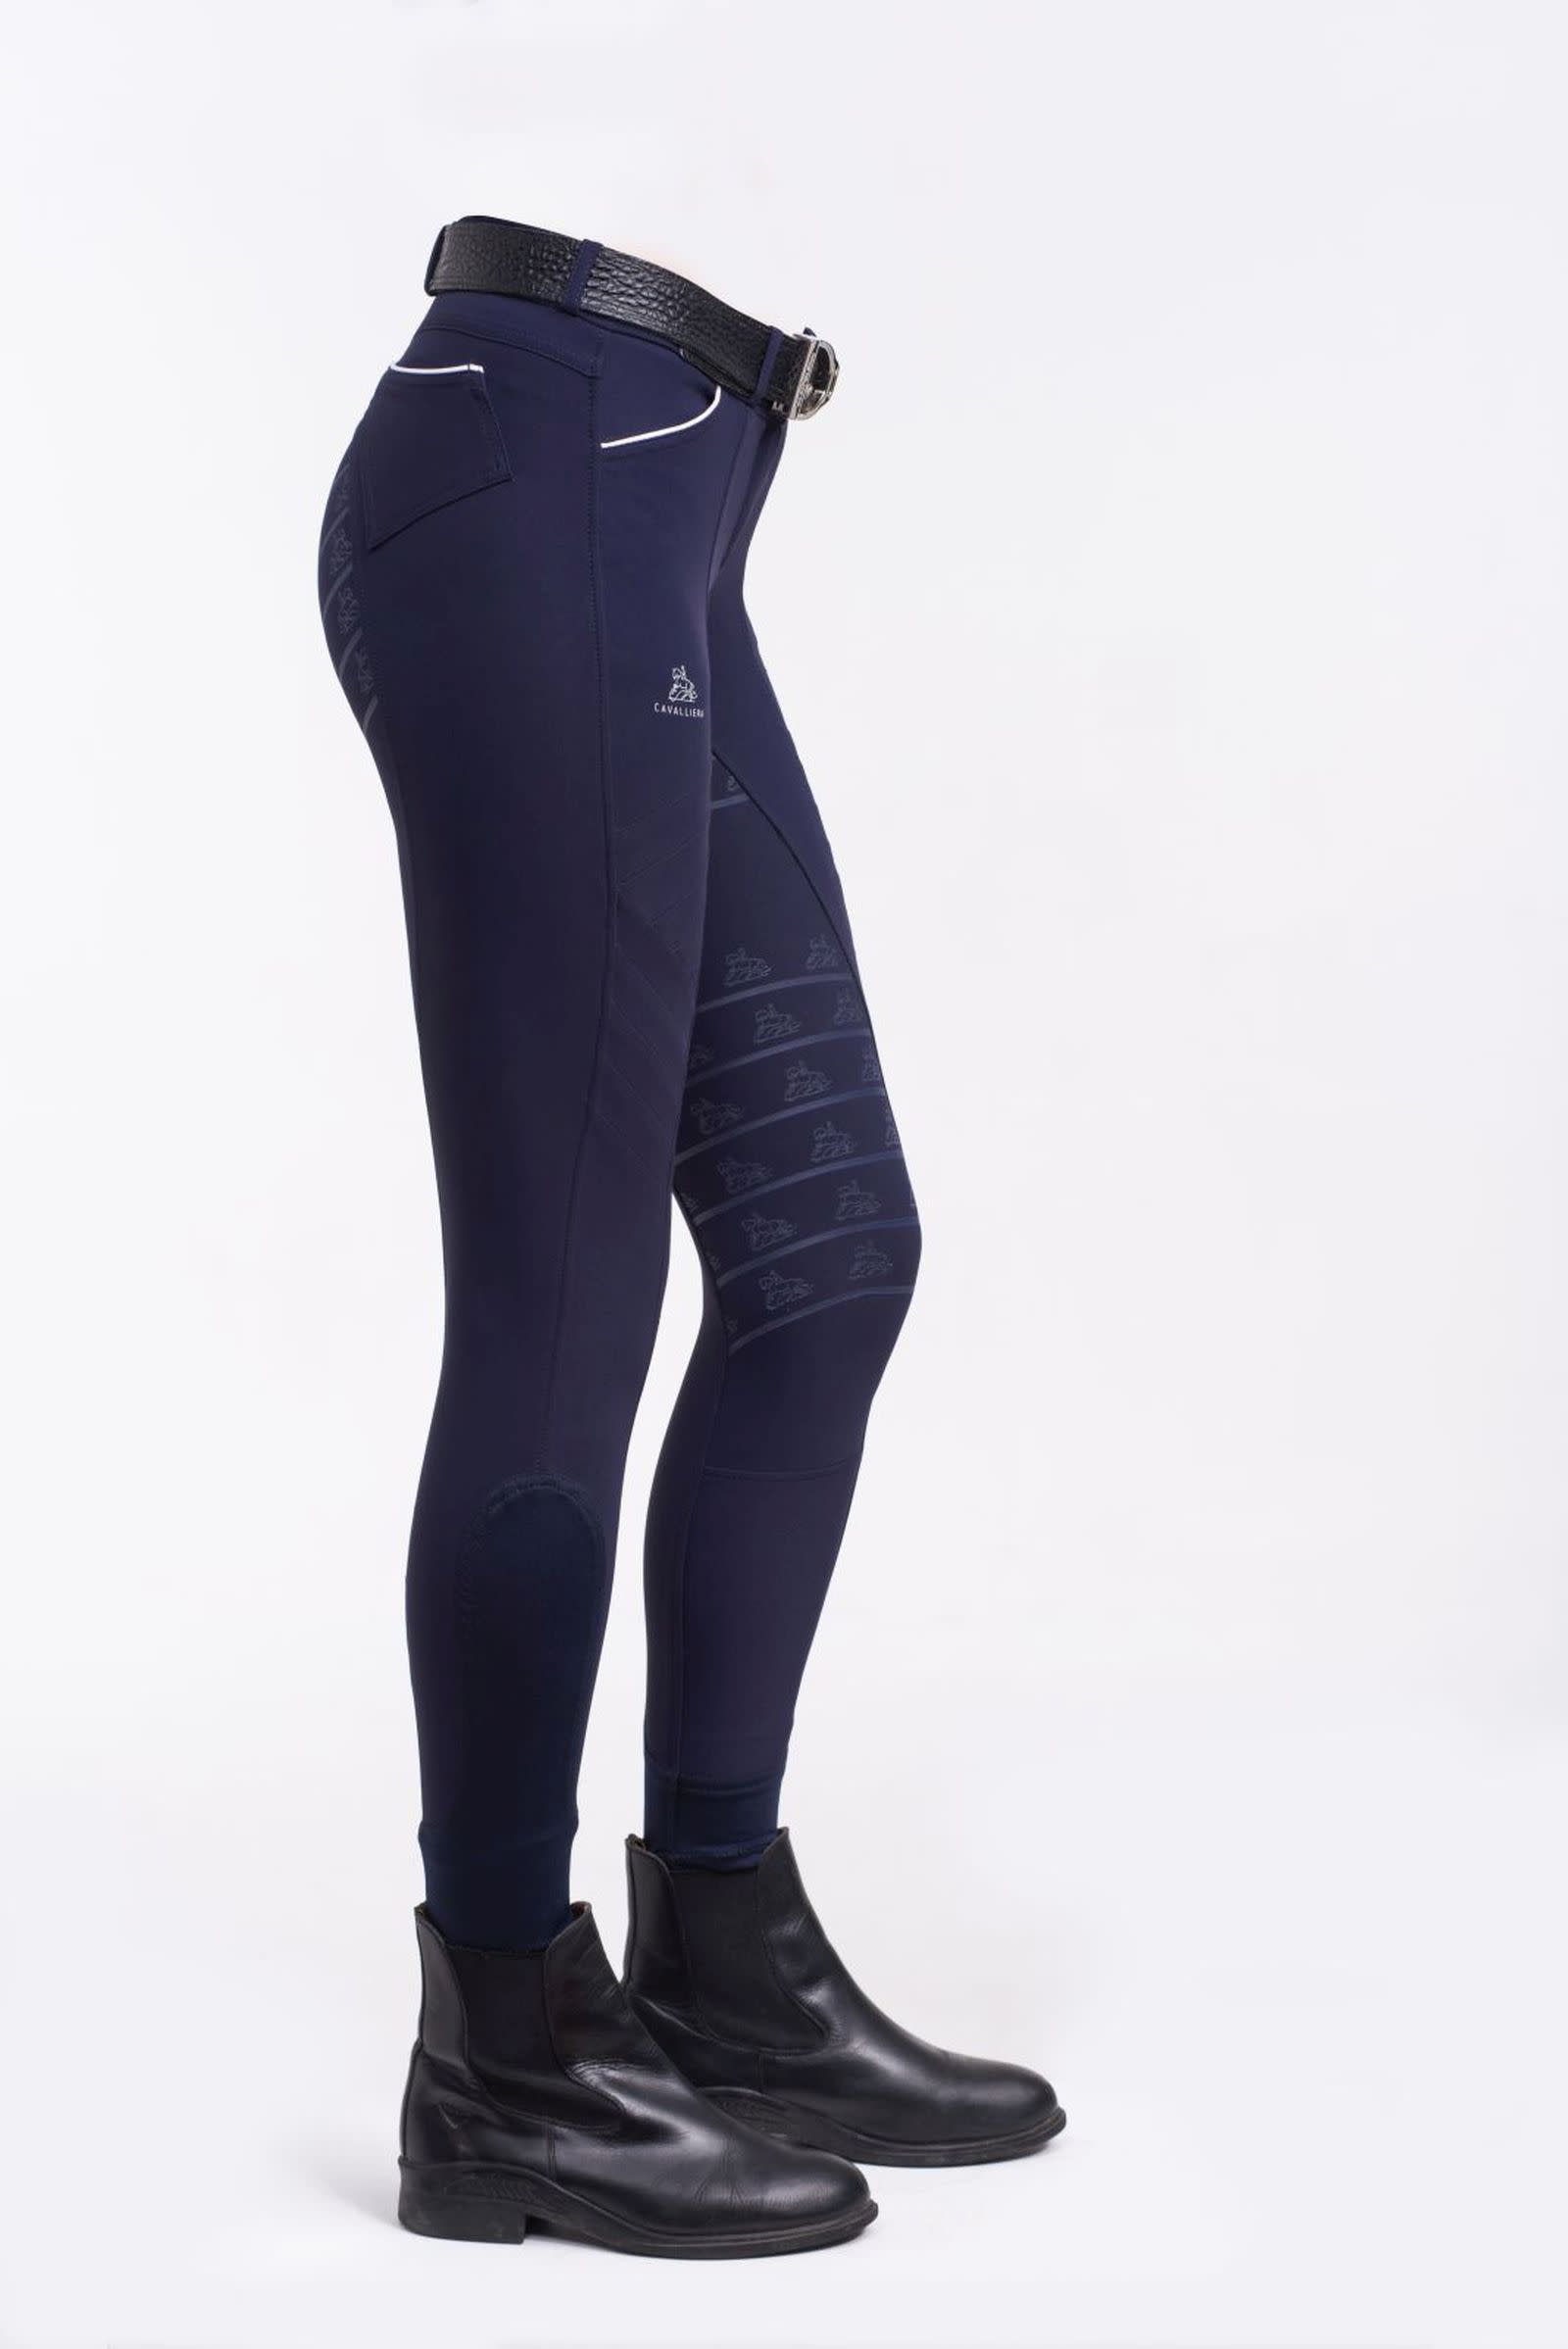 Riding Show Breeches Royal Sport White/Navy Full Seat - Outdoor Functional  Wear